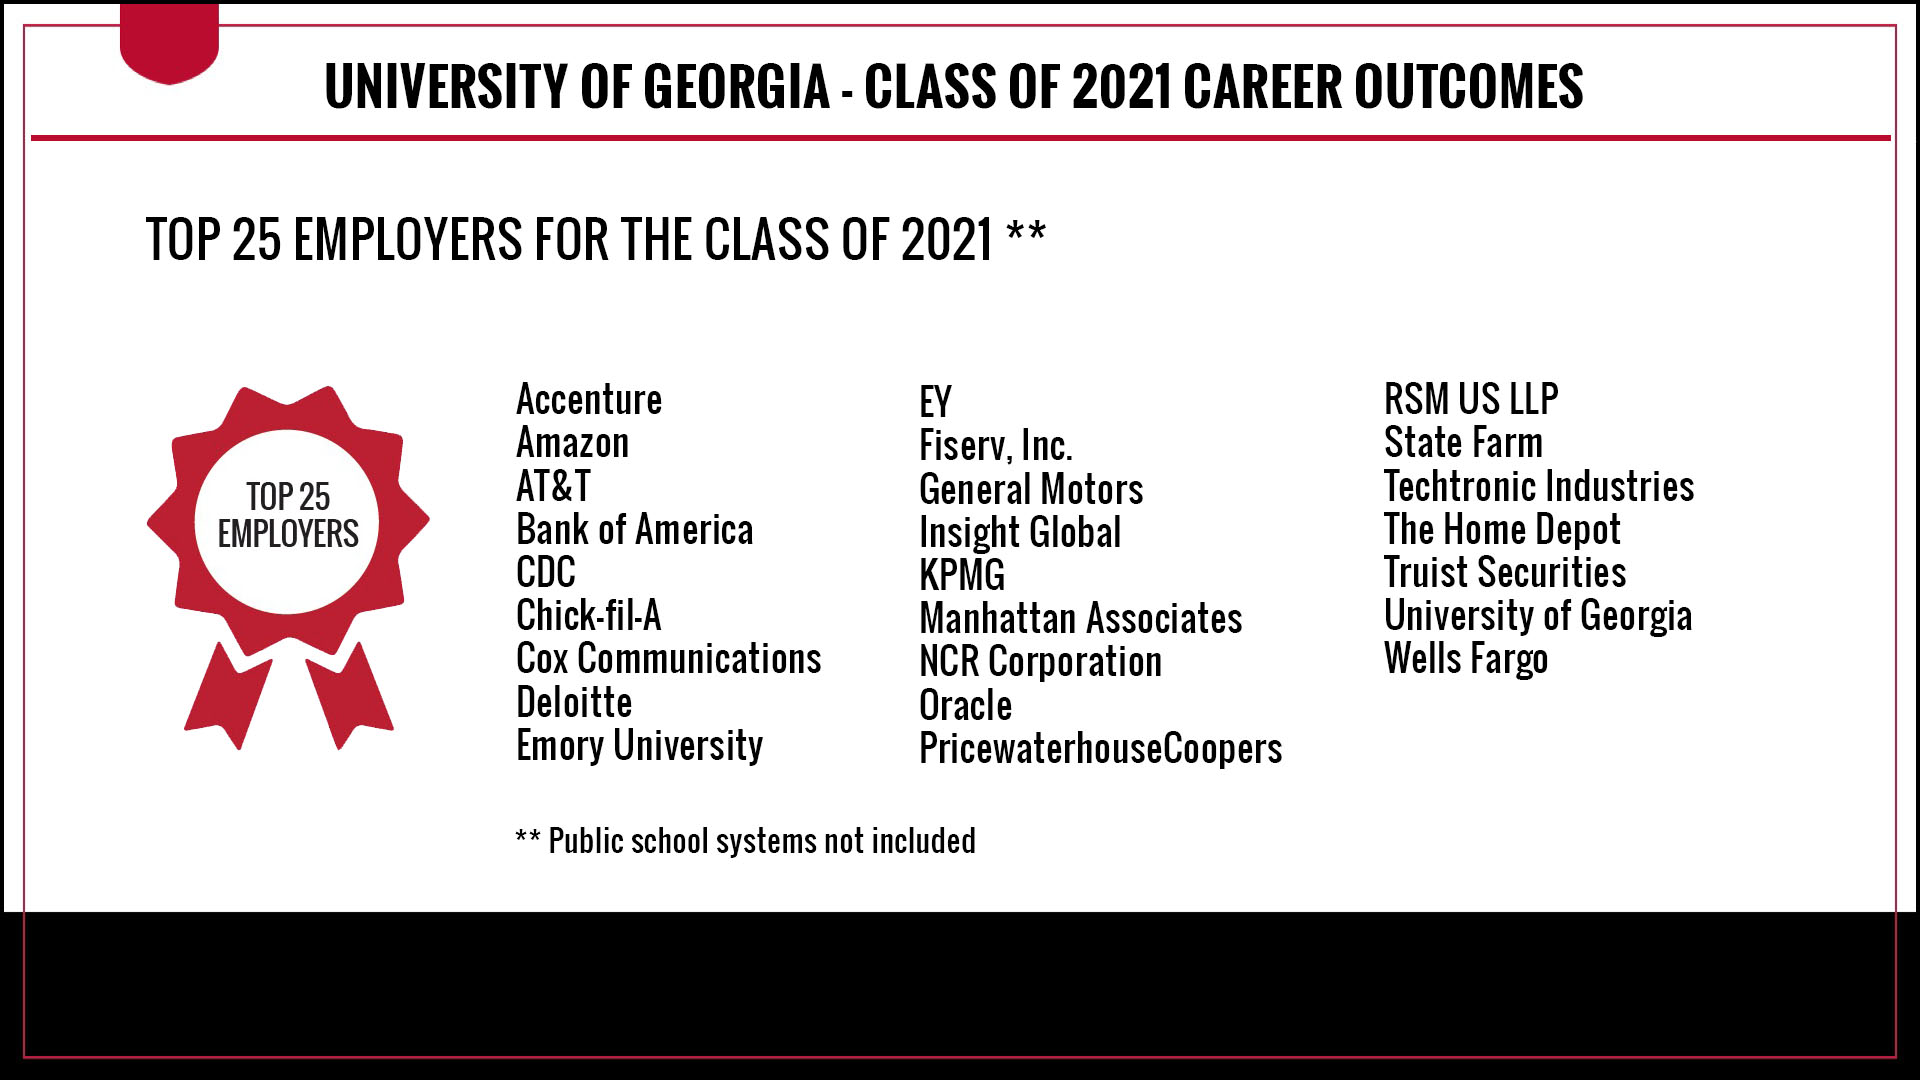 The top employers for UGA Class of 2021 graduates were Accenture, Amazon, AT&T, Bank of America, CDC, Chick-fil-A, Cox Communications, Deloitte, Emory University, EY, Fiserv, Inc.
General Motors, Insight Global, KPMG, Manhattan Associates, NCR Corporation, Oracle, PricewaterhouseCoopers, RSM US LLP, State Farm, Techtonic Industries, The Home Depot, Truist Securities, University of Georgia, and Wells Fargo